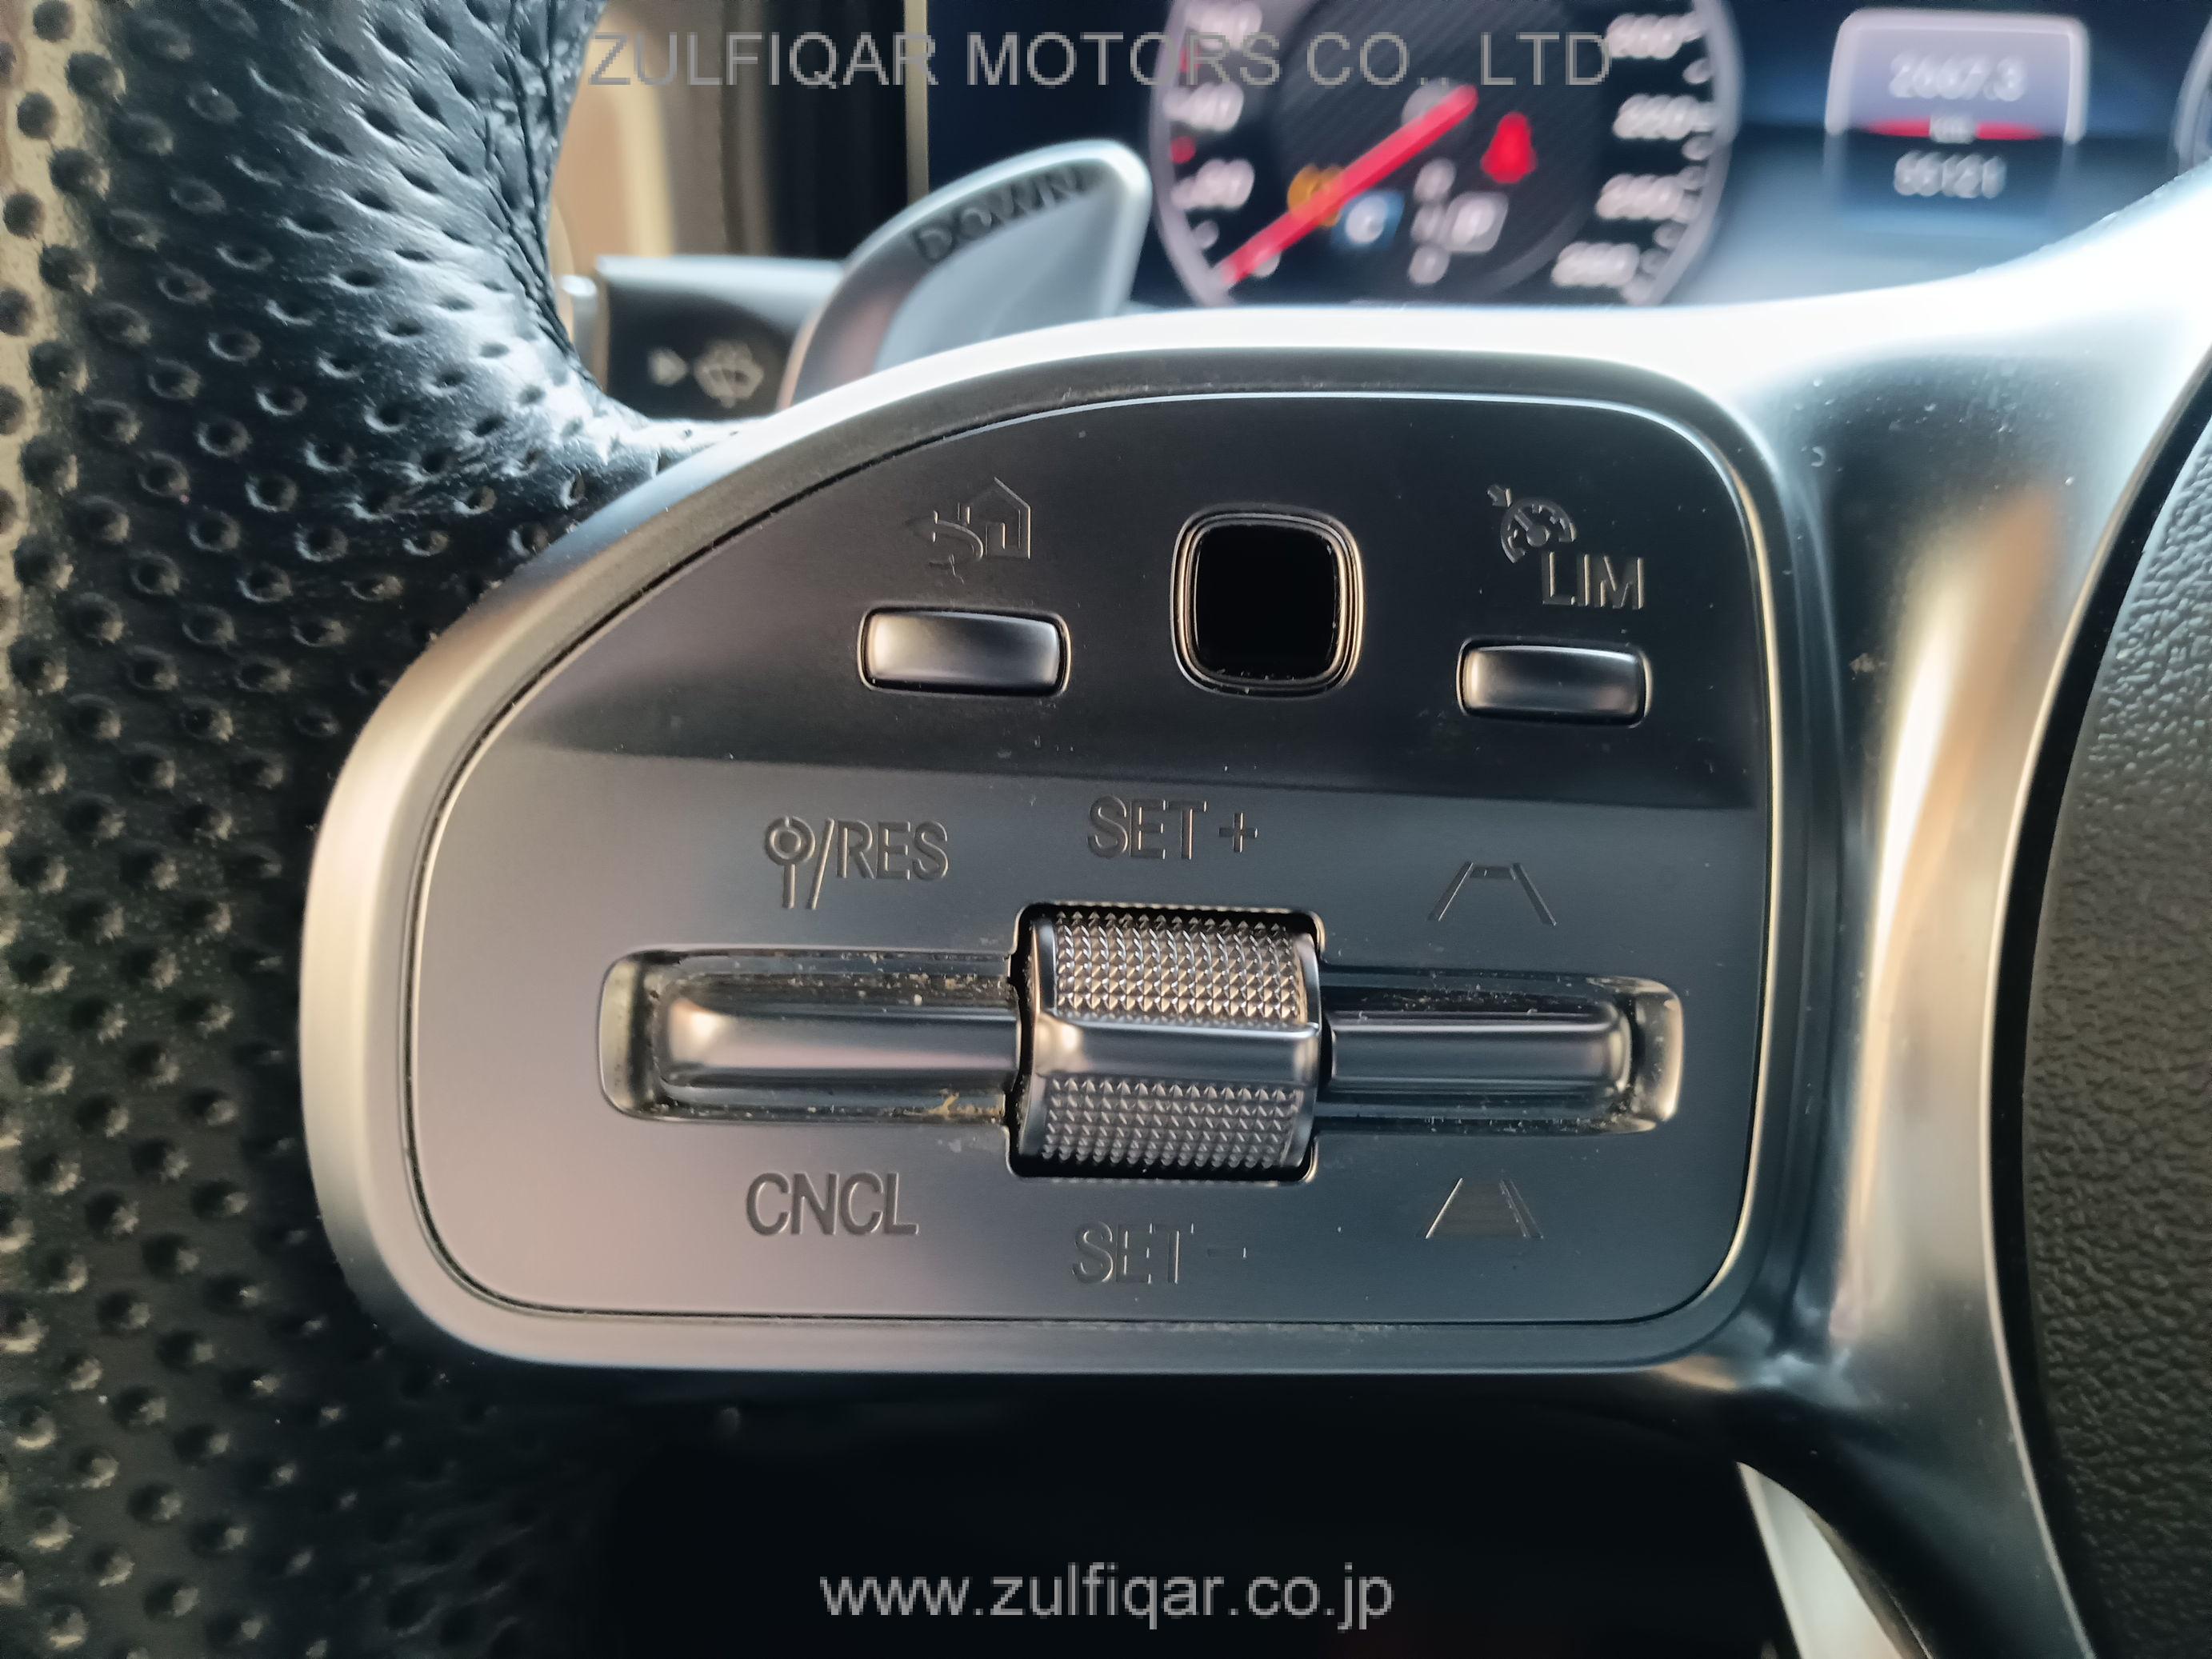 MERCEDES AMG G CLASS 2019 Image 73